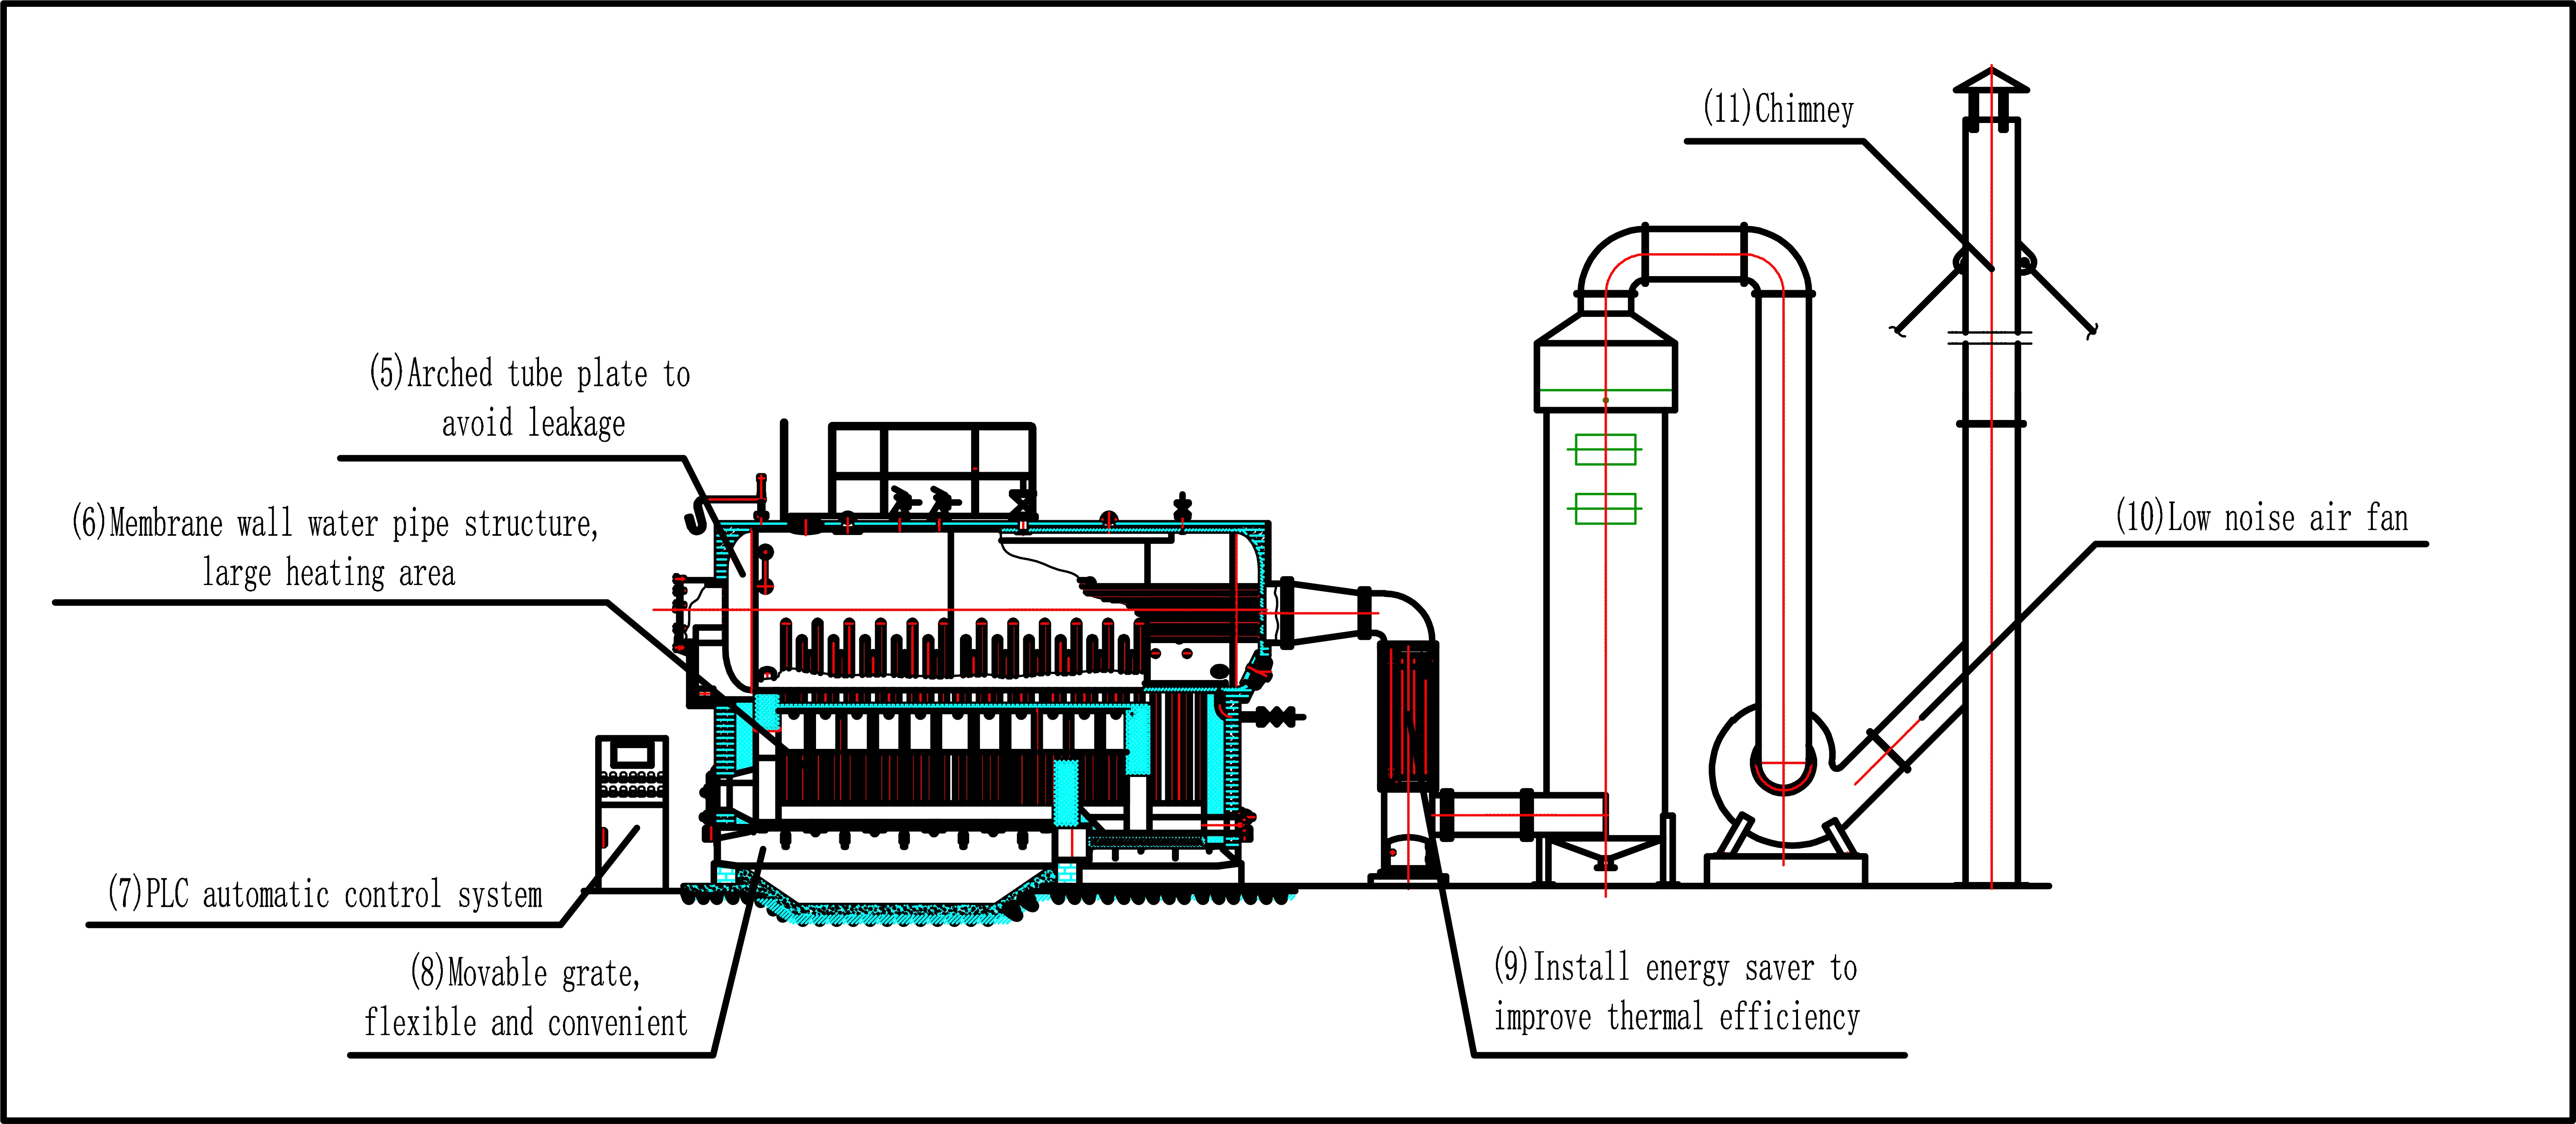 A part of the steam boiler that burns fuel is the фото 31